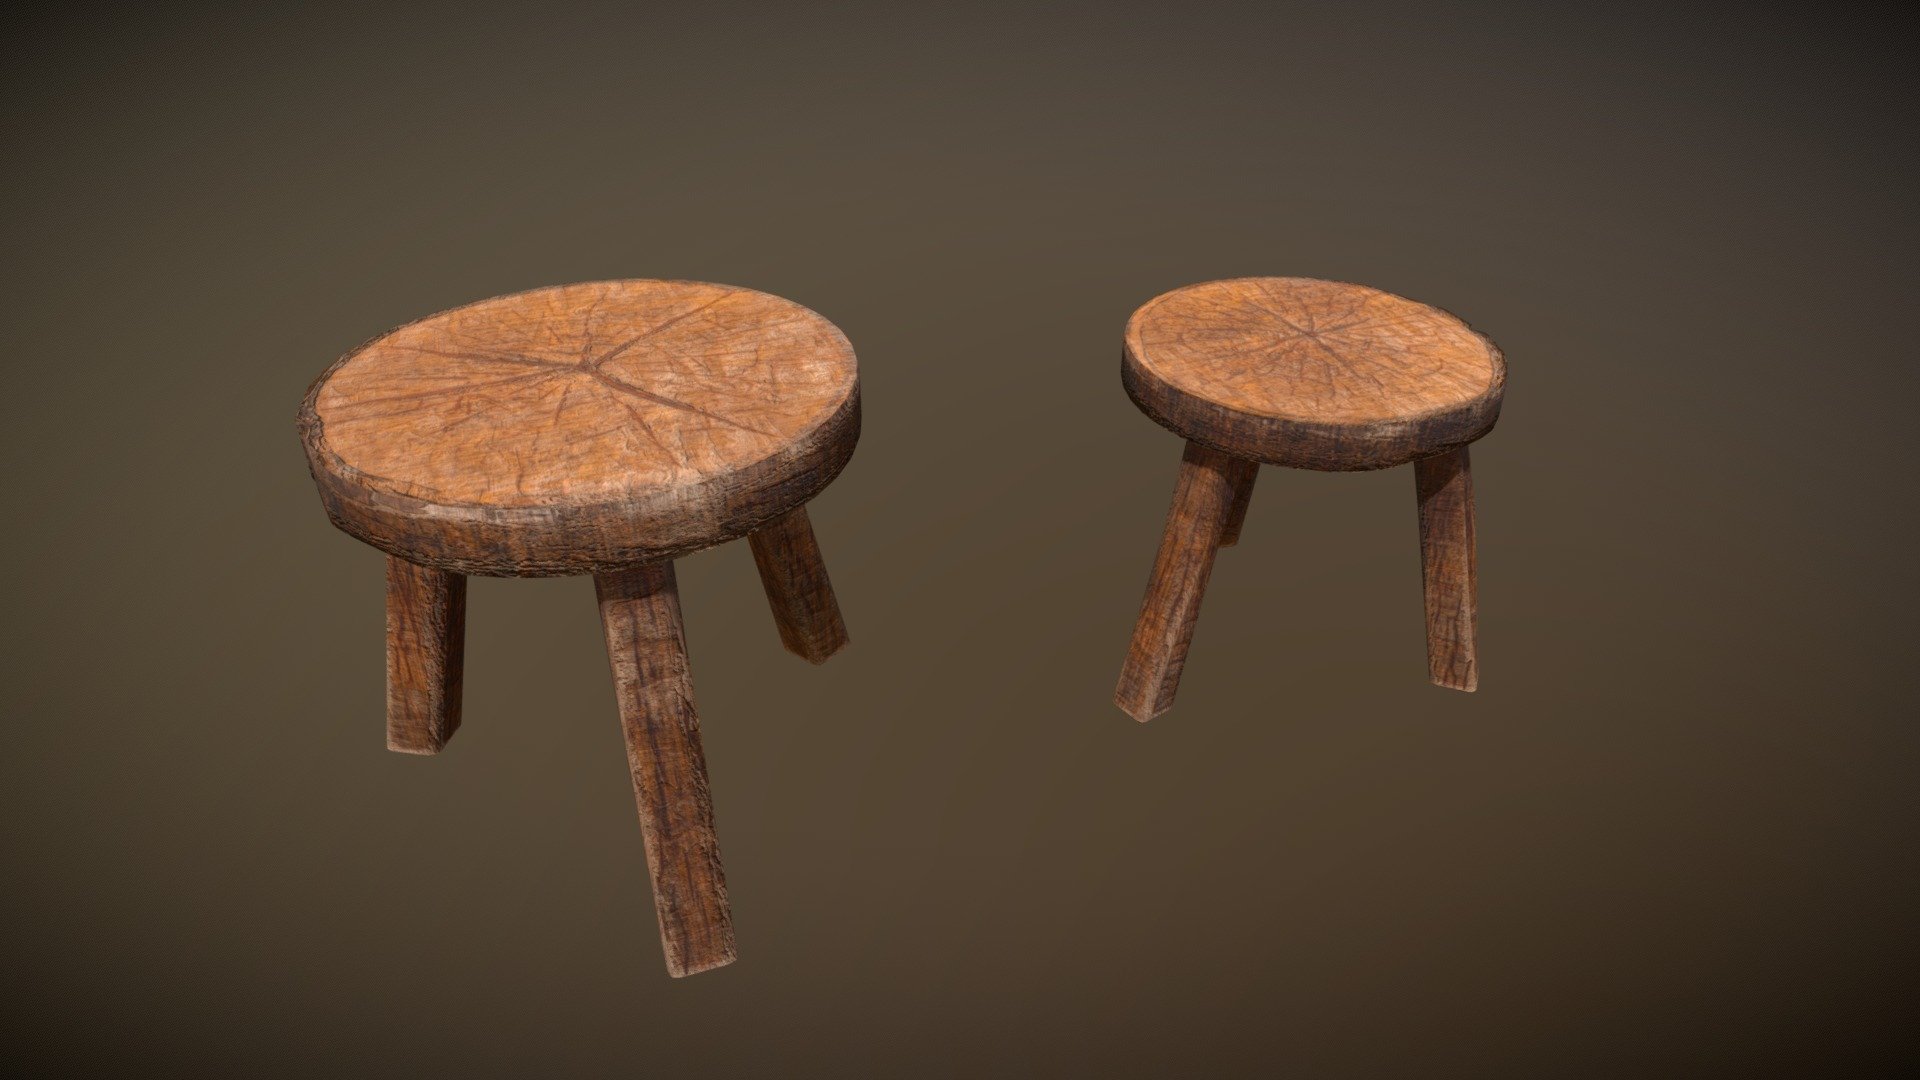 Medieval Wood Short Stools  3D Model. This model contains the Medieval Wood Short Stools  itself 

All modeled in Maya, textured with Substance Painter.

The model was built to scale and is UV unwrapped properly. Contains only one 4K texture set.  

⦁   1188 tris. 

⦁   Contains: .FBX .OBJ and .DAE

⦁   Model has clean topology. No Ngons.

⦁   Built to scale

⦁   Unwrapped UV Map

⦁   4K Texture set

⦁   High quality details

⦁   Based on real life references

⦁   Renders done in Marmoset Toolbag

Polycount: 

Verts 640

Edges 1306

Faces 676

Tris 1188

If you have any questions please feel free to ask me 3d model